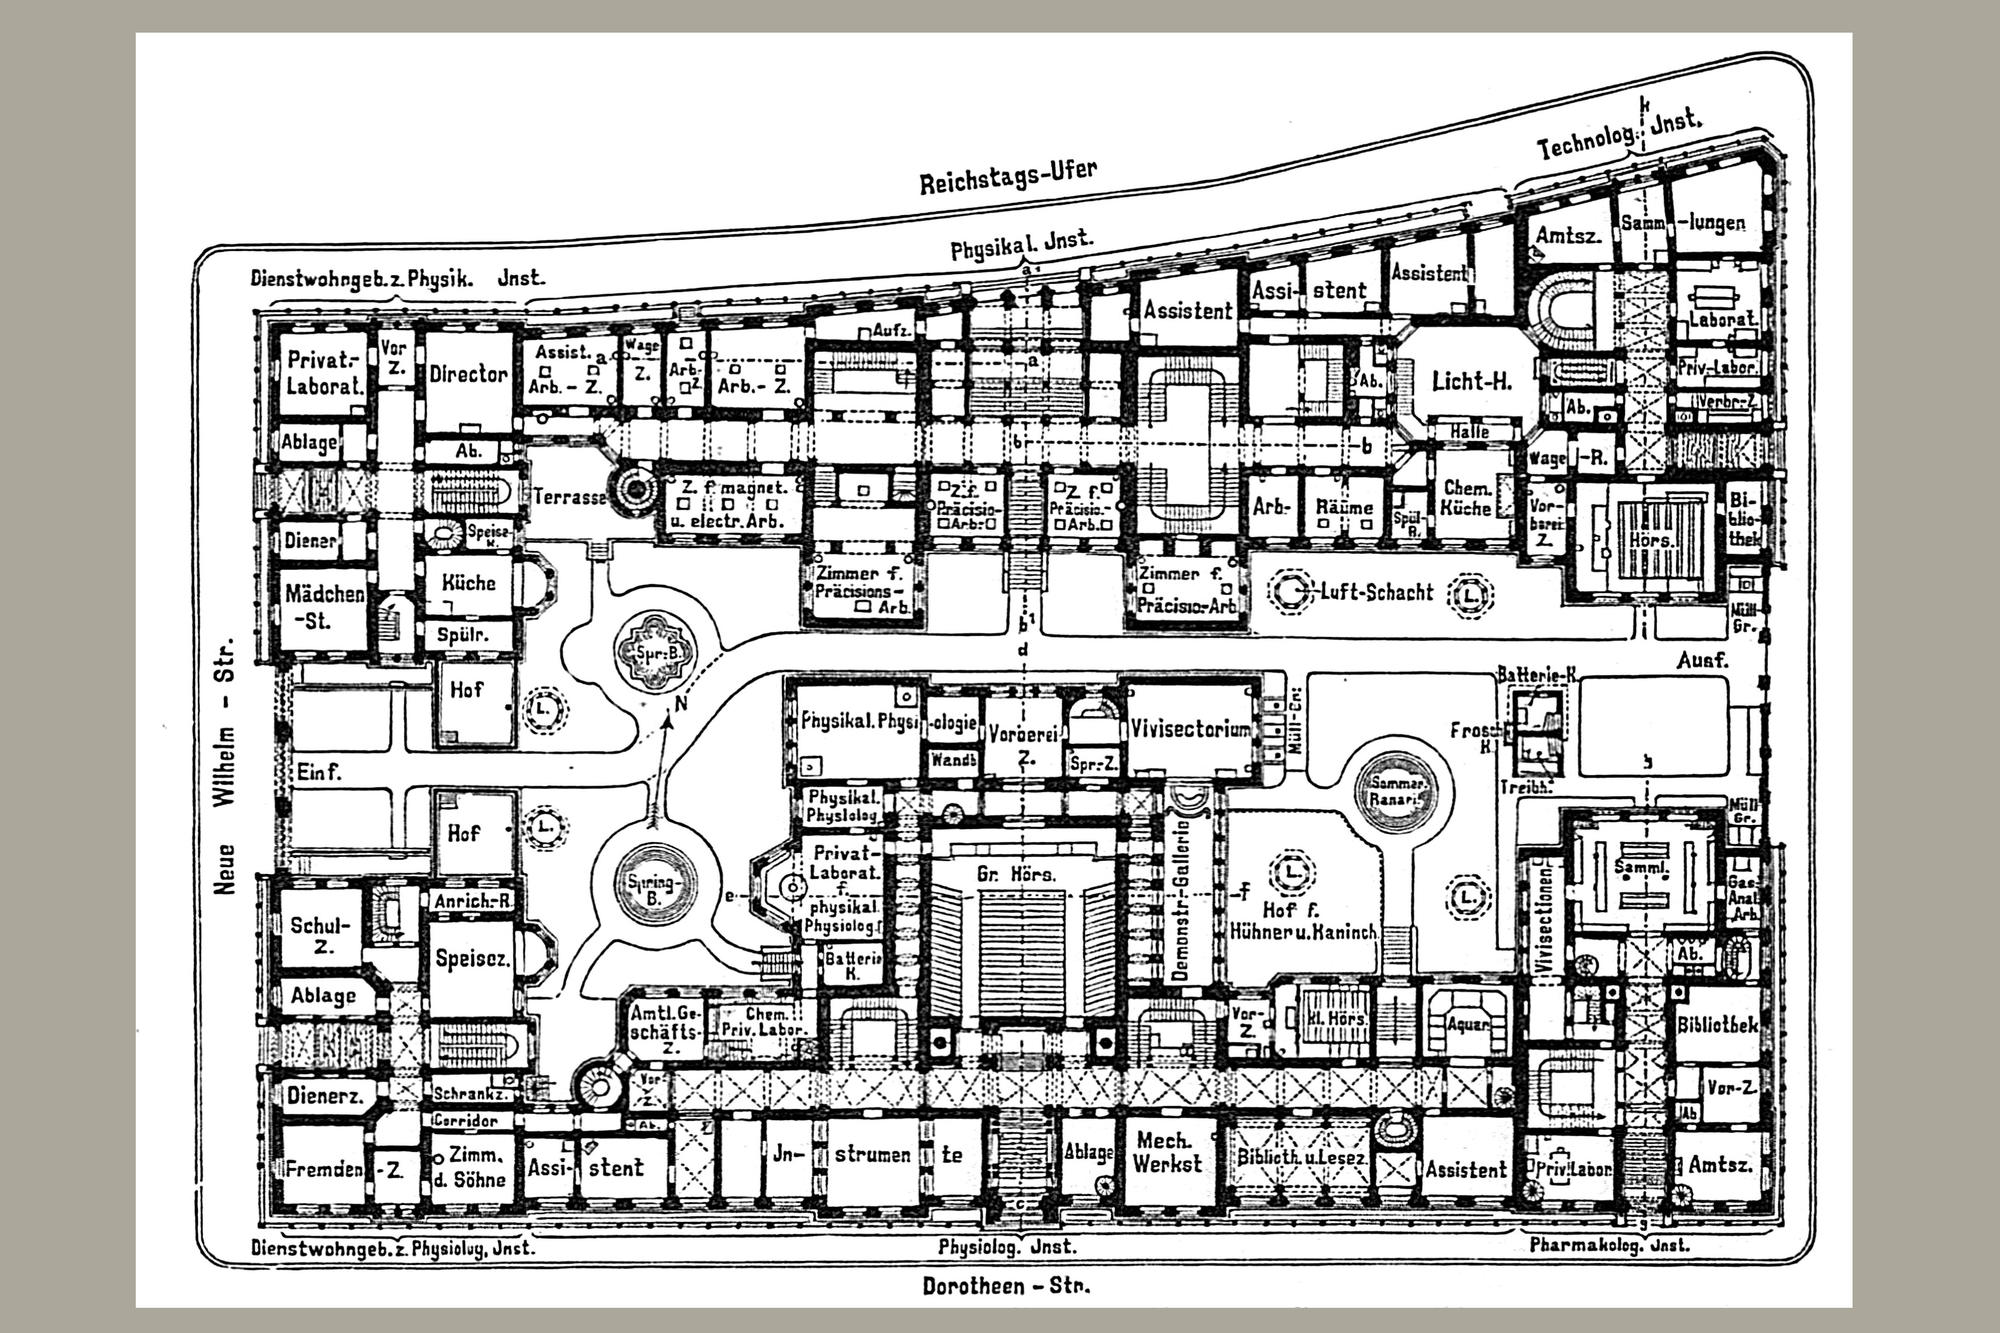 The floor plan of the building complex for the natural sciences shows which institutes were located between Reichstags-Ufer und Dorotheenstraße.